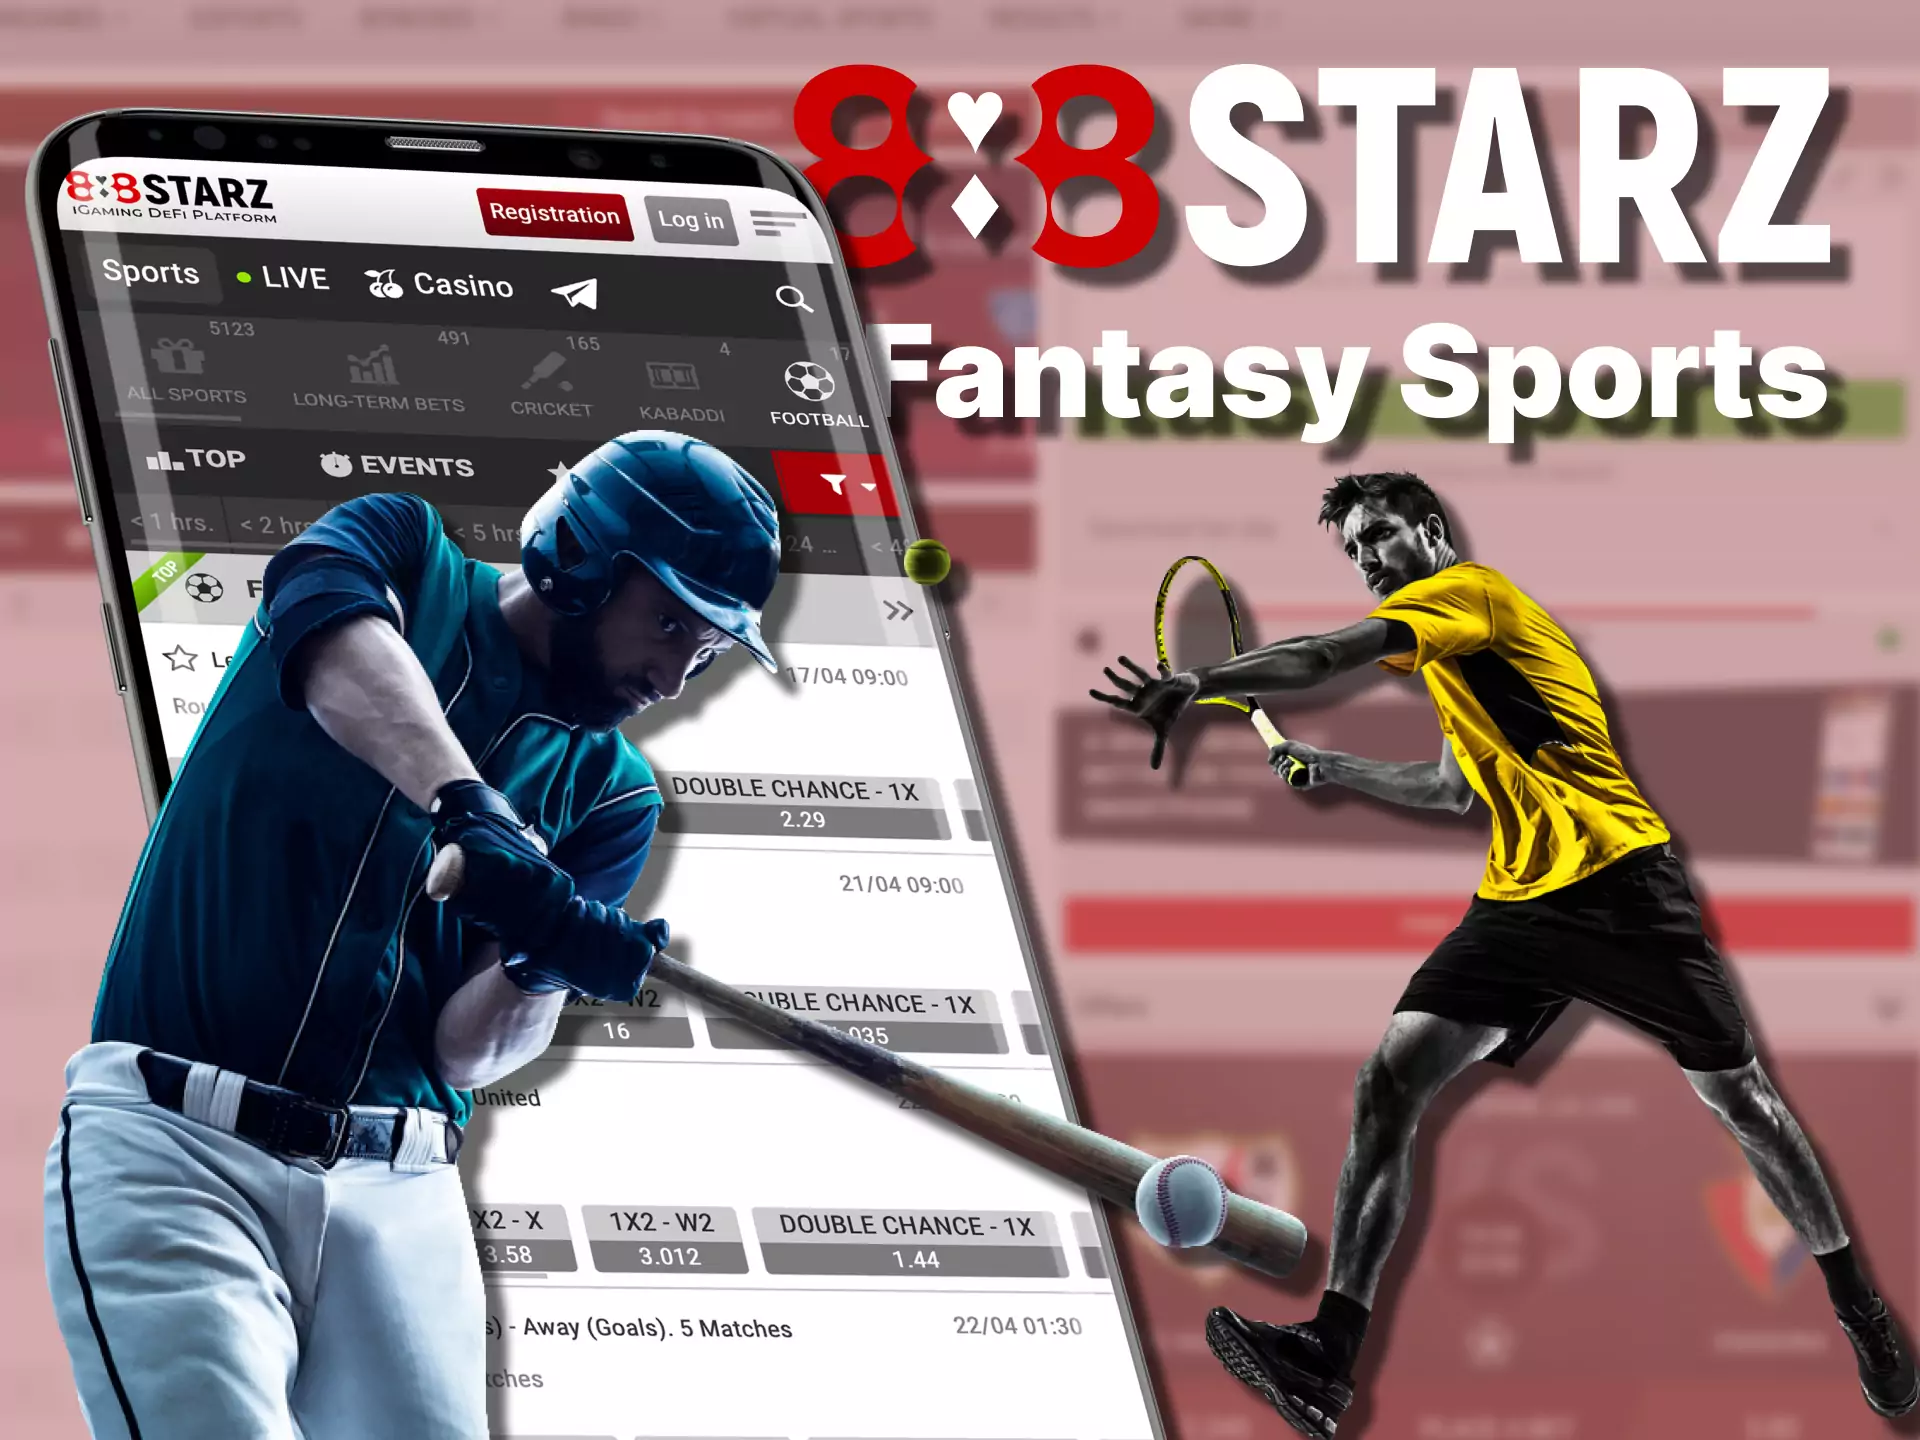 With the 888starz app, fantasy sports betting is available to you.